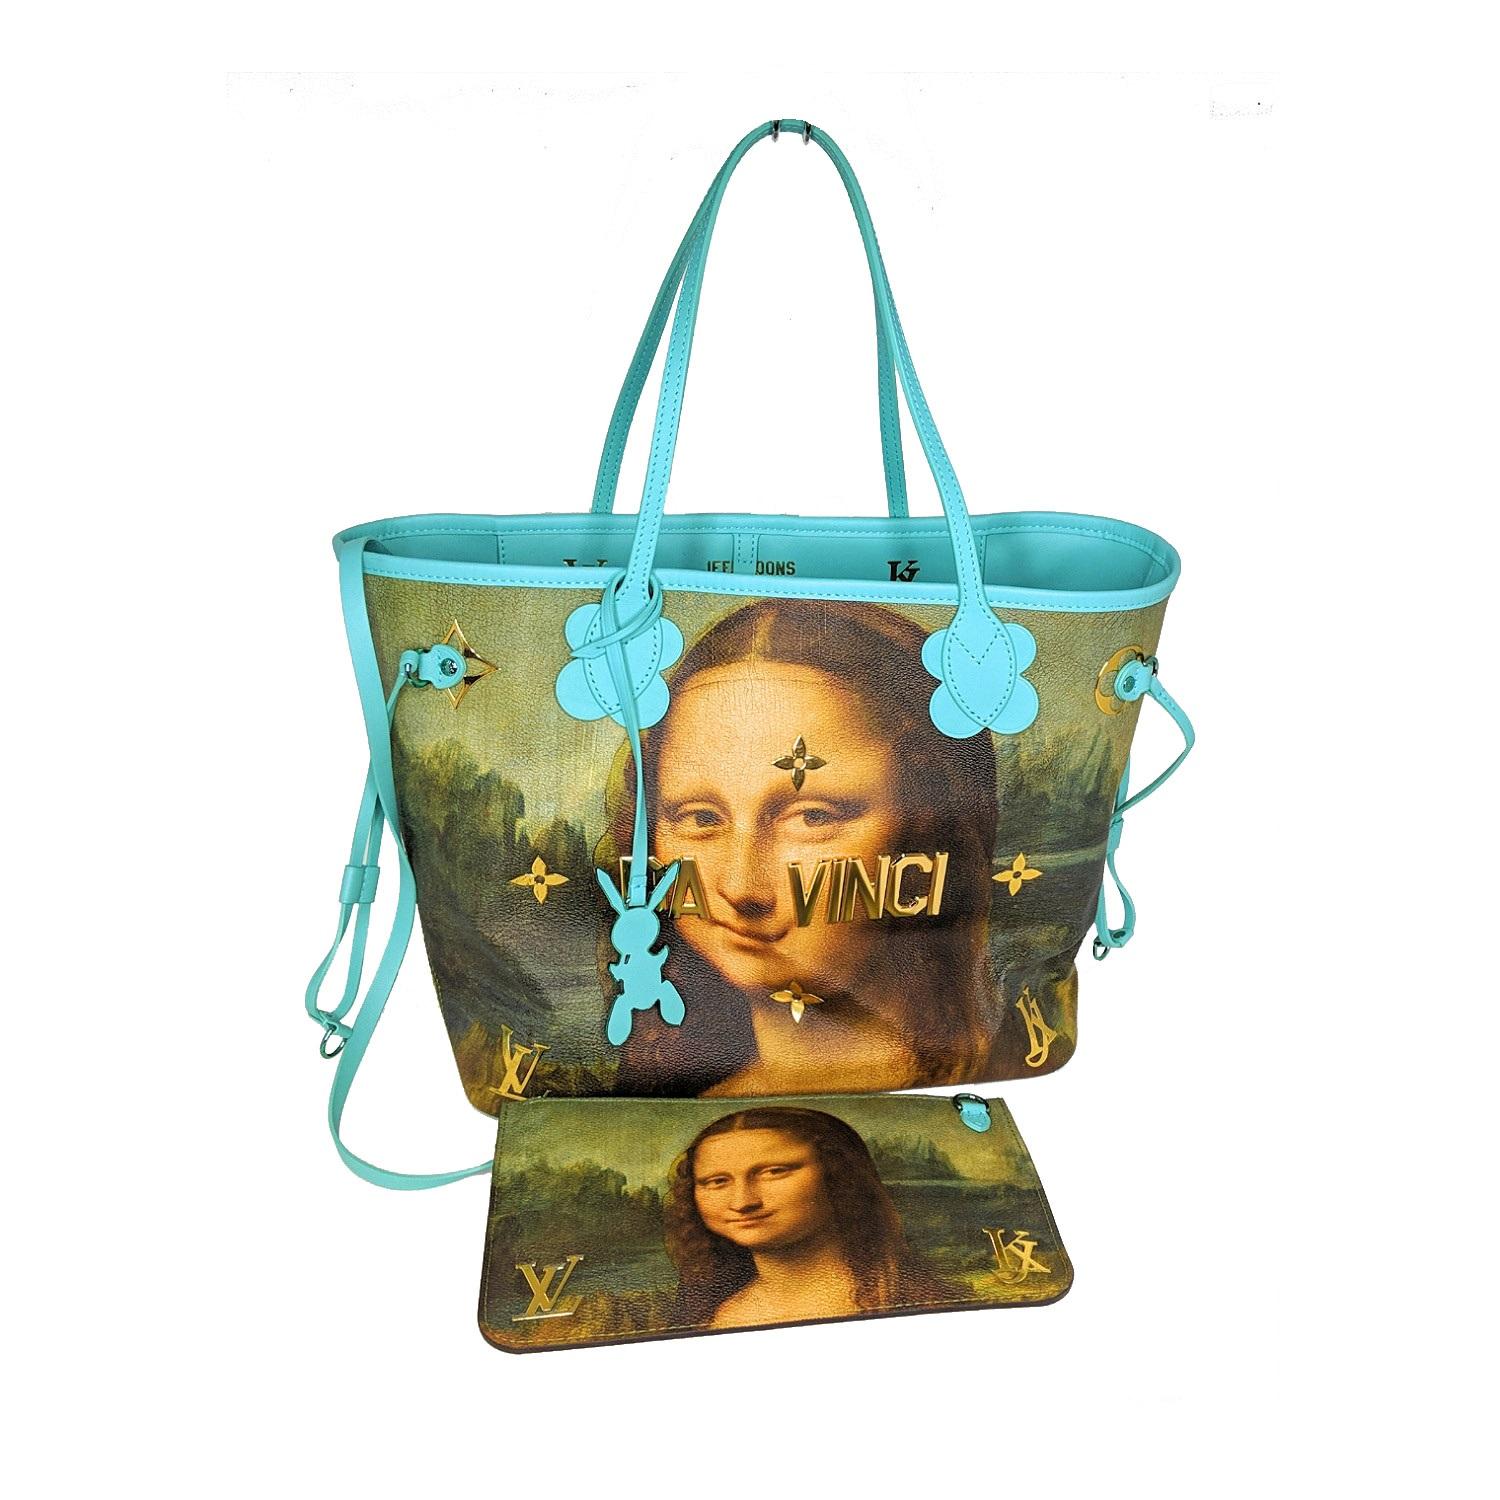 As part of Louis Vuitton's Masters Collection, this stunning bag is the creation of renowned artist Jeff Koons and just the latest art collaboration Louis Vuitton has done. The Masters Collection features imagery from Koons Gazing Ball series of